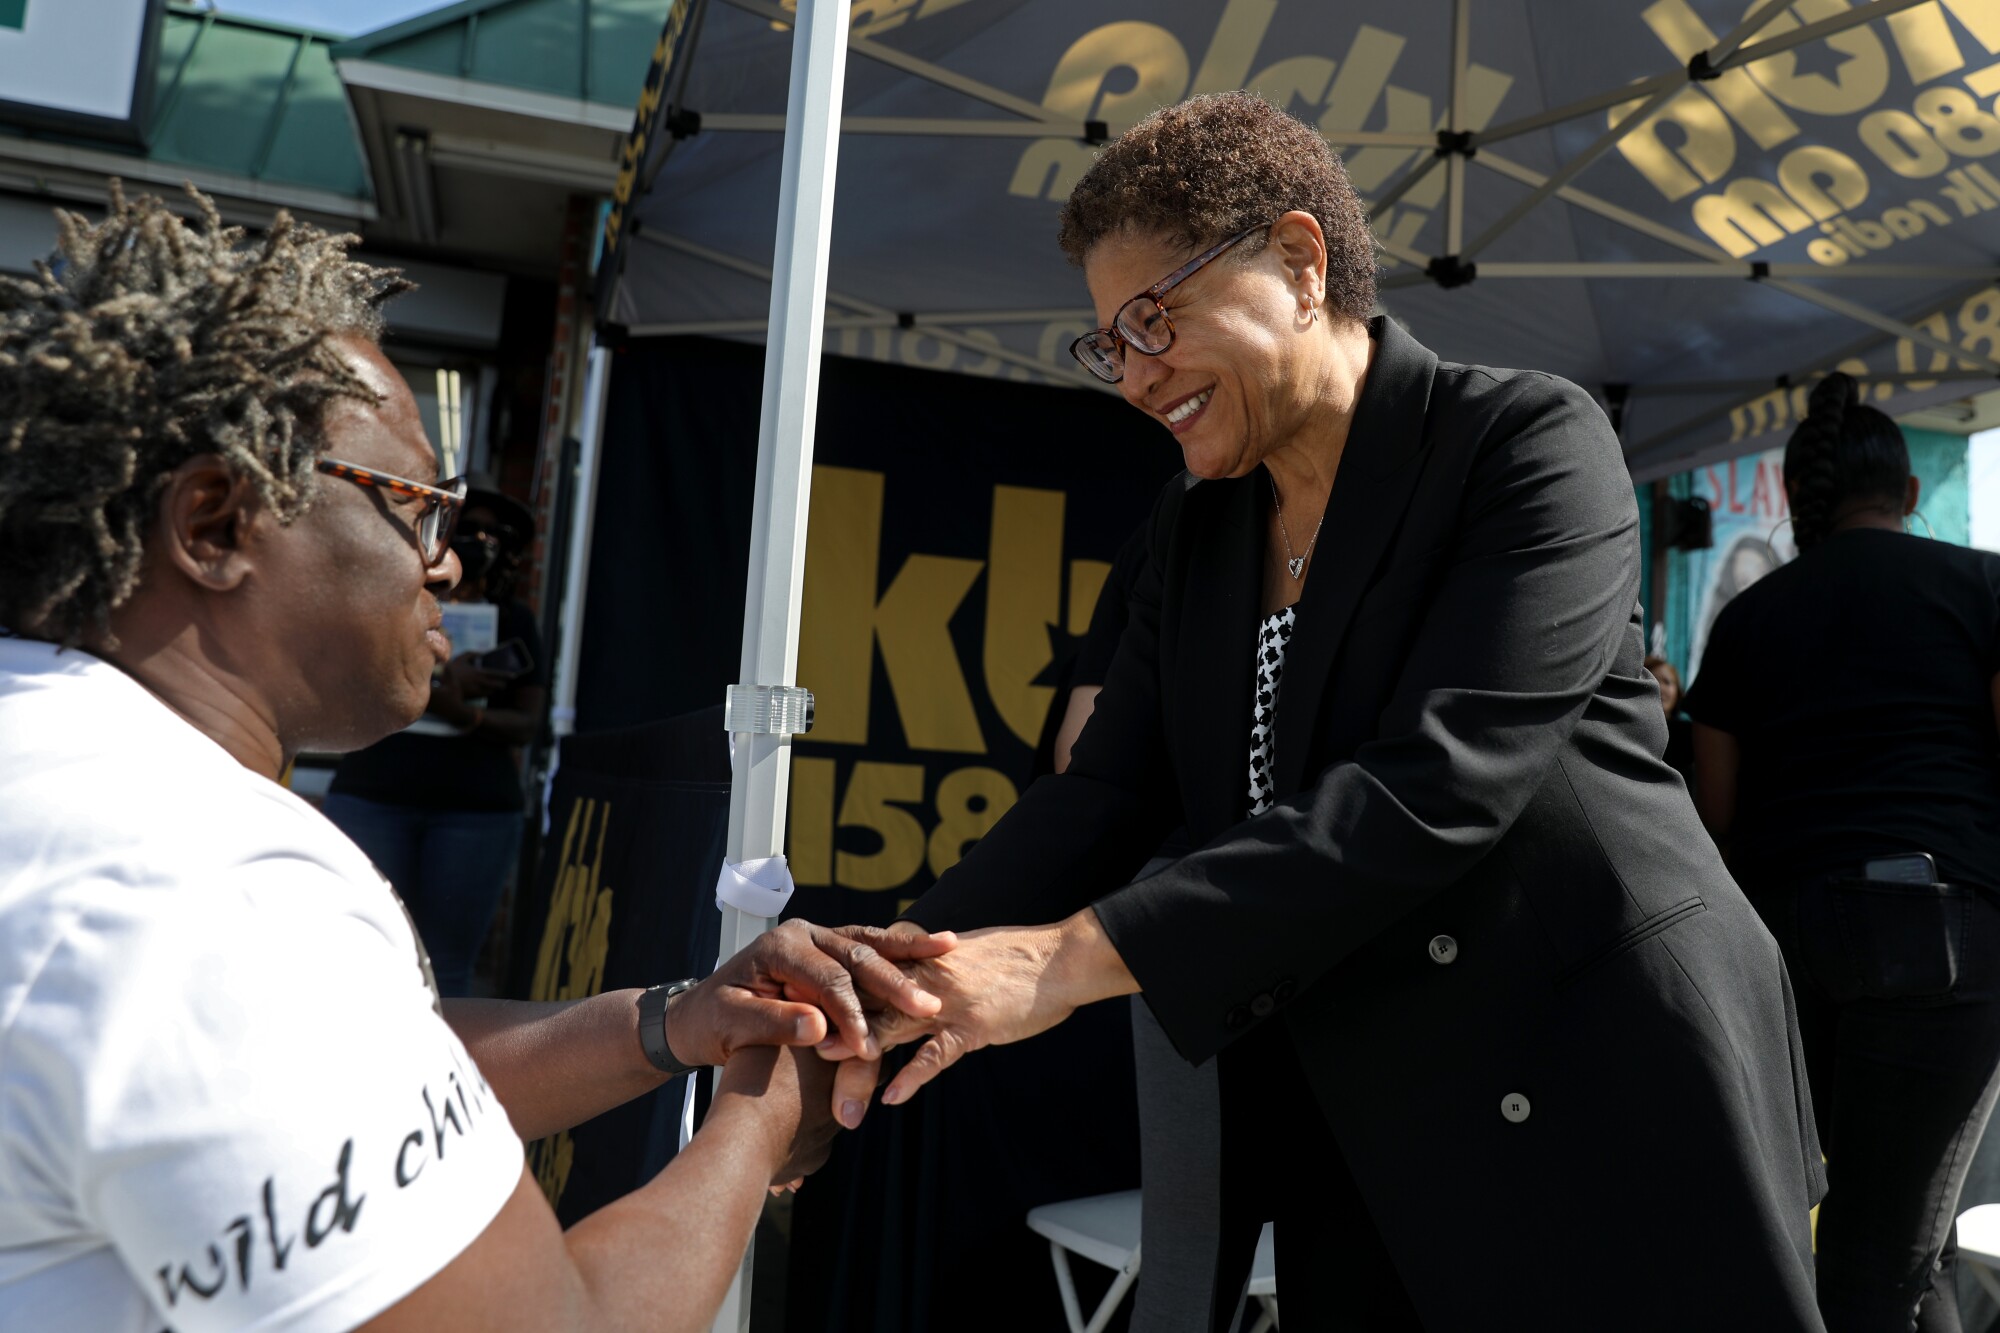 Rep. Karen Bass, right, mayoral candidate for Los Angeles greets a man.